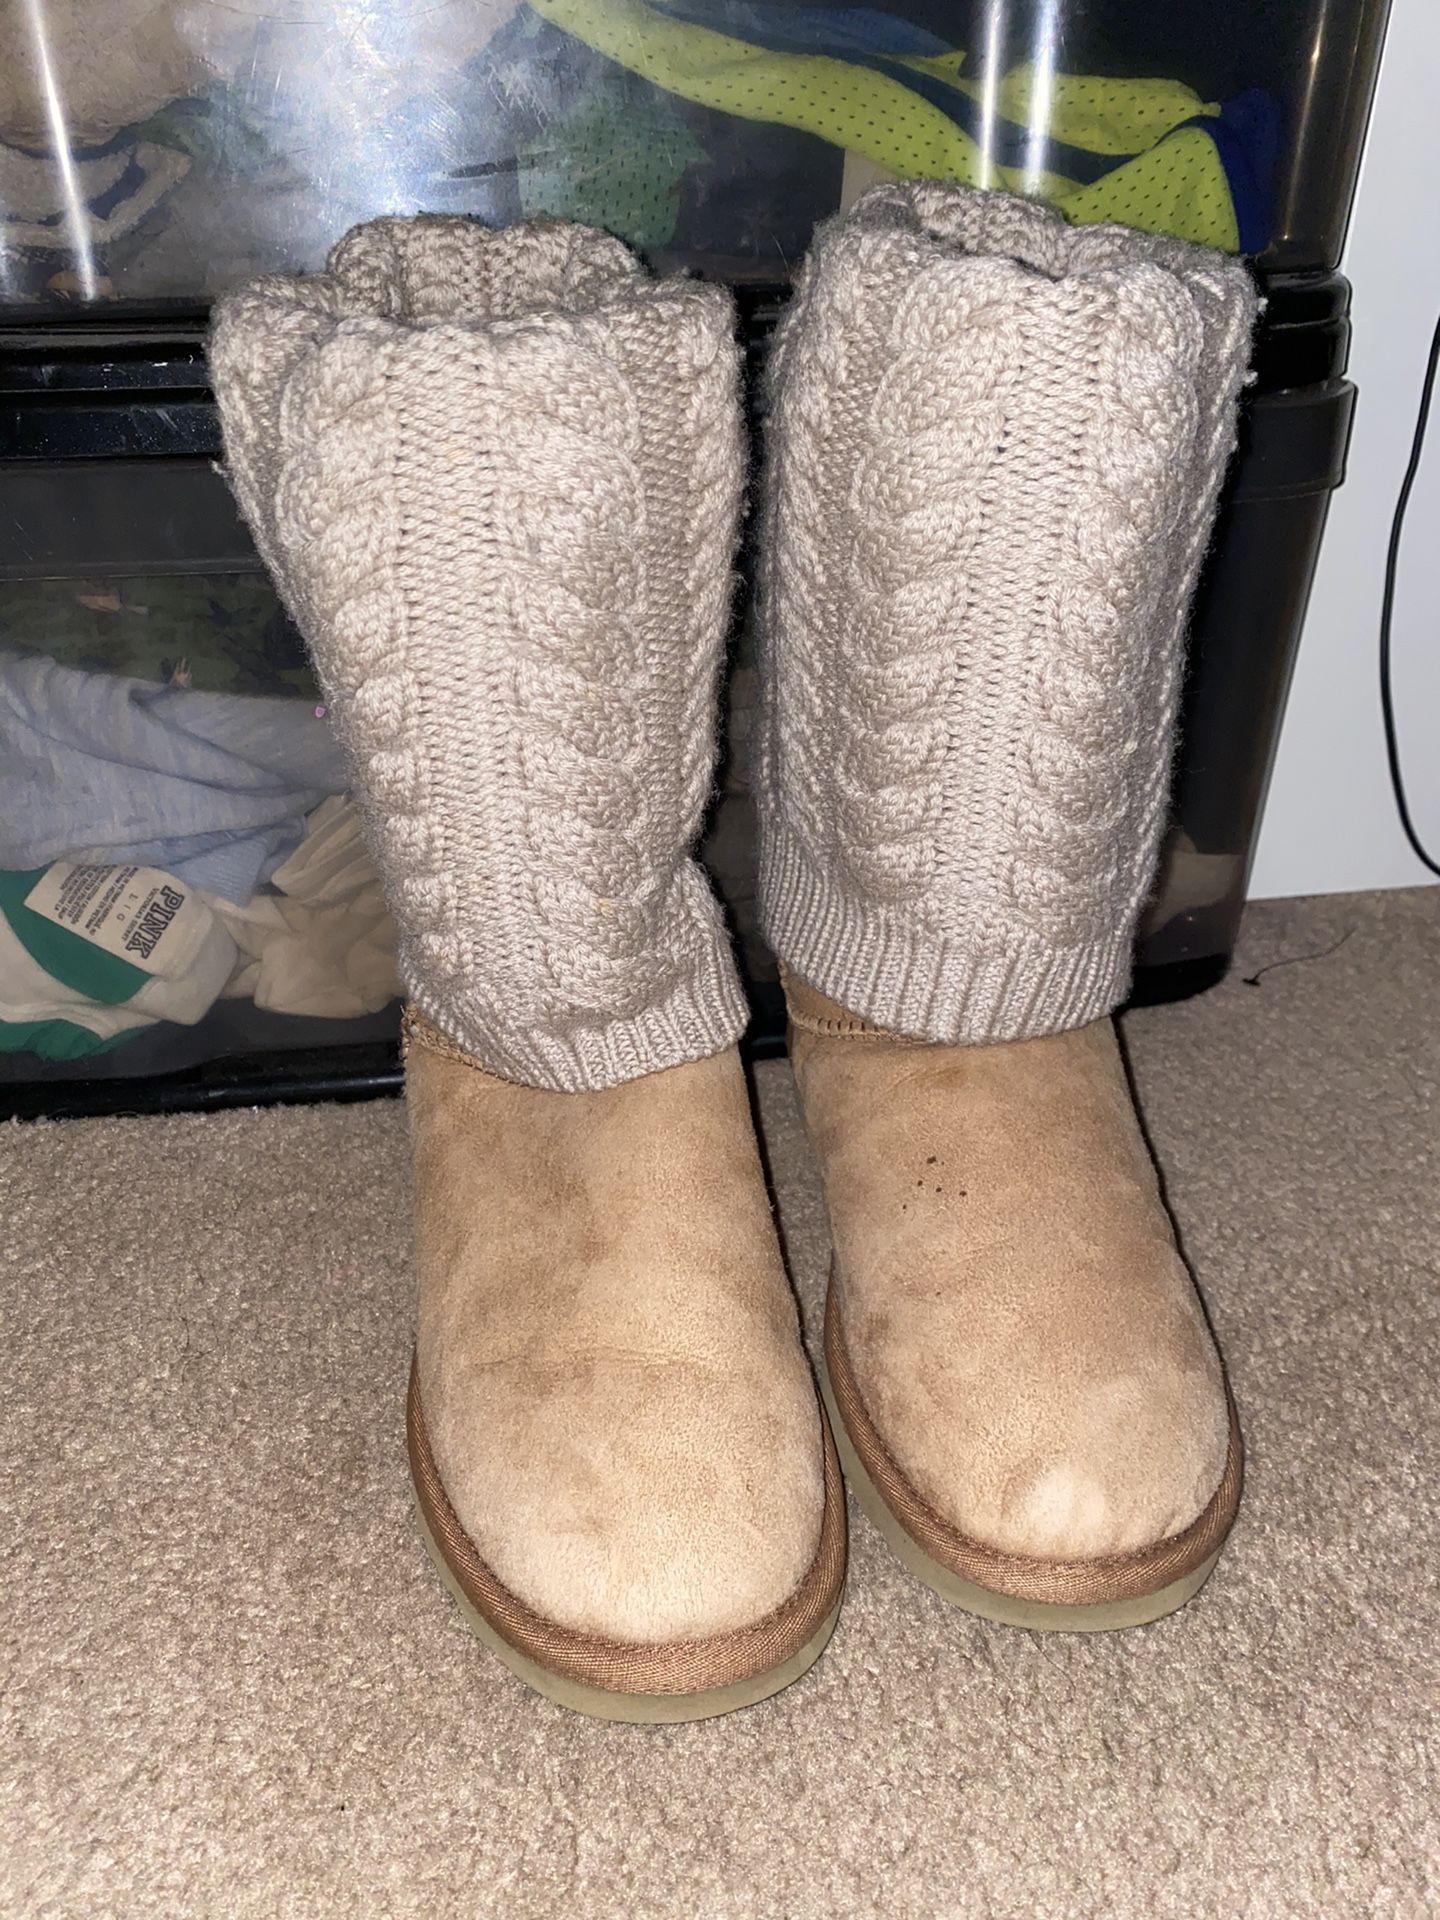 Gently Used Ugg’s With Knit Top Size 6